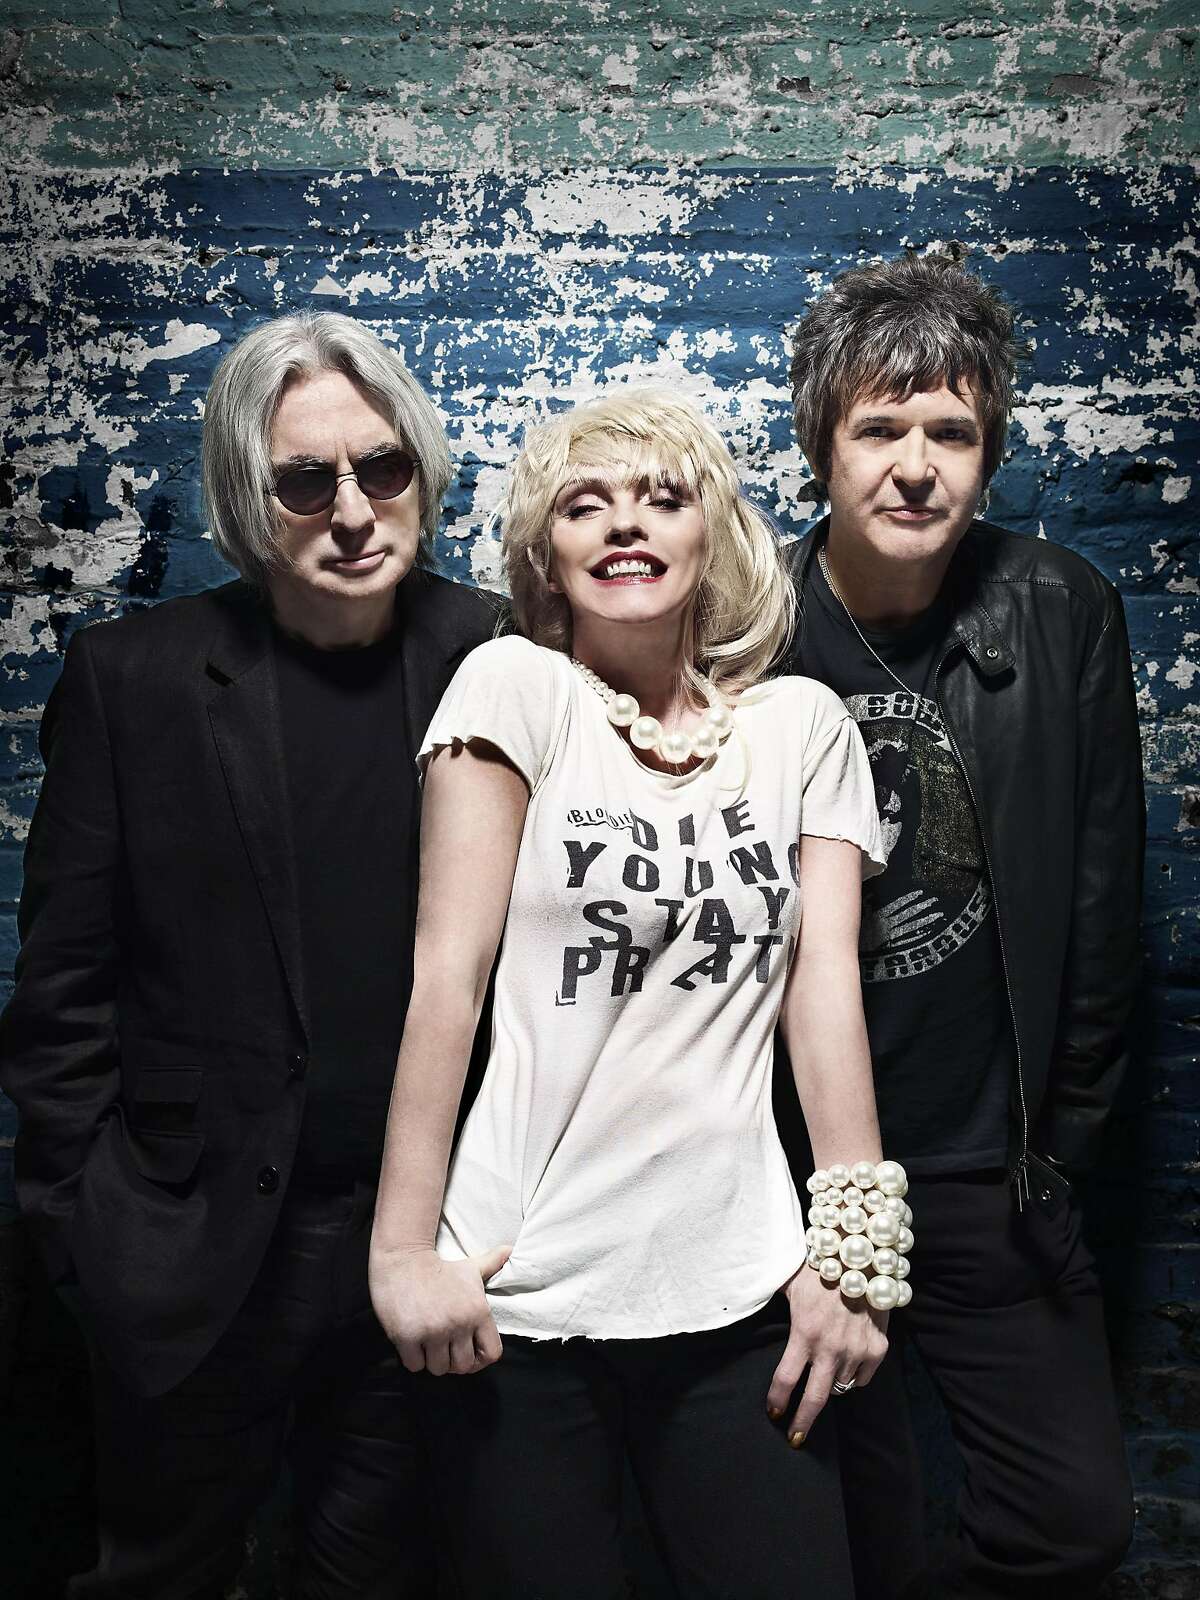 Three of Blondie's orignal members, Chris Stein, Deborah Harry and Clem Burke, will be performing along with several new members at a Sunday, Oct. 7, 2012, show at the Capitol Theatre, 149 Westchester Ave, Port Chester, N.Y. Last year, the band released its ninth album, "Panic of Girls." For more information, call 914-937-4126 or visit www.thecapitoltheatre.com. Contributed photo/F. Scott Schafer